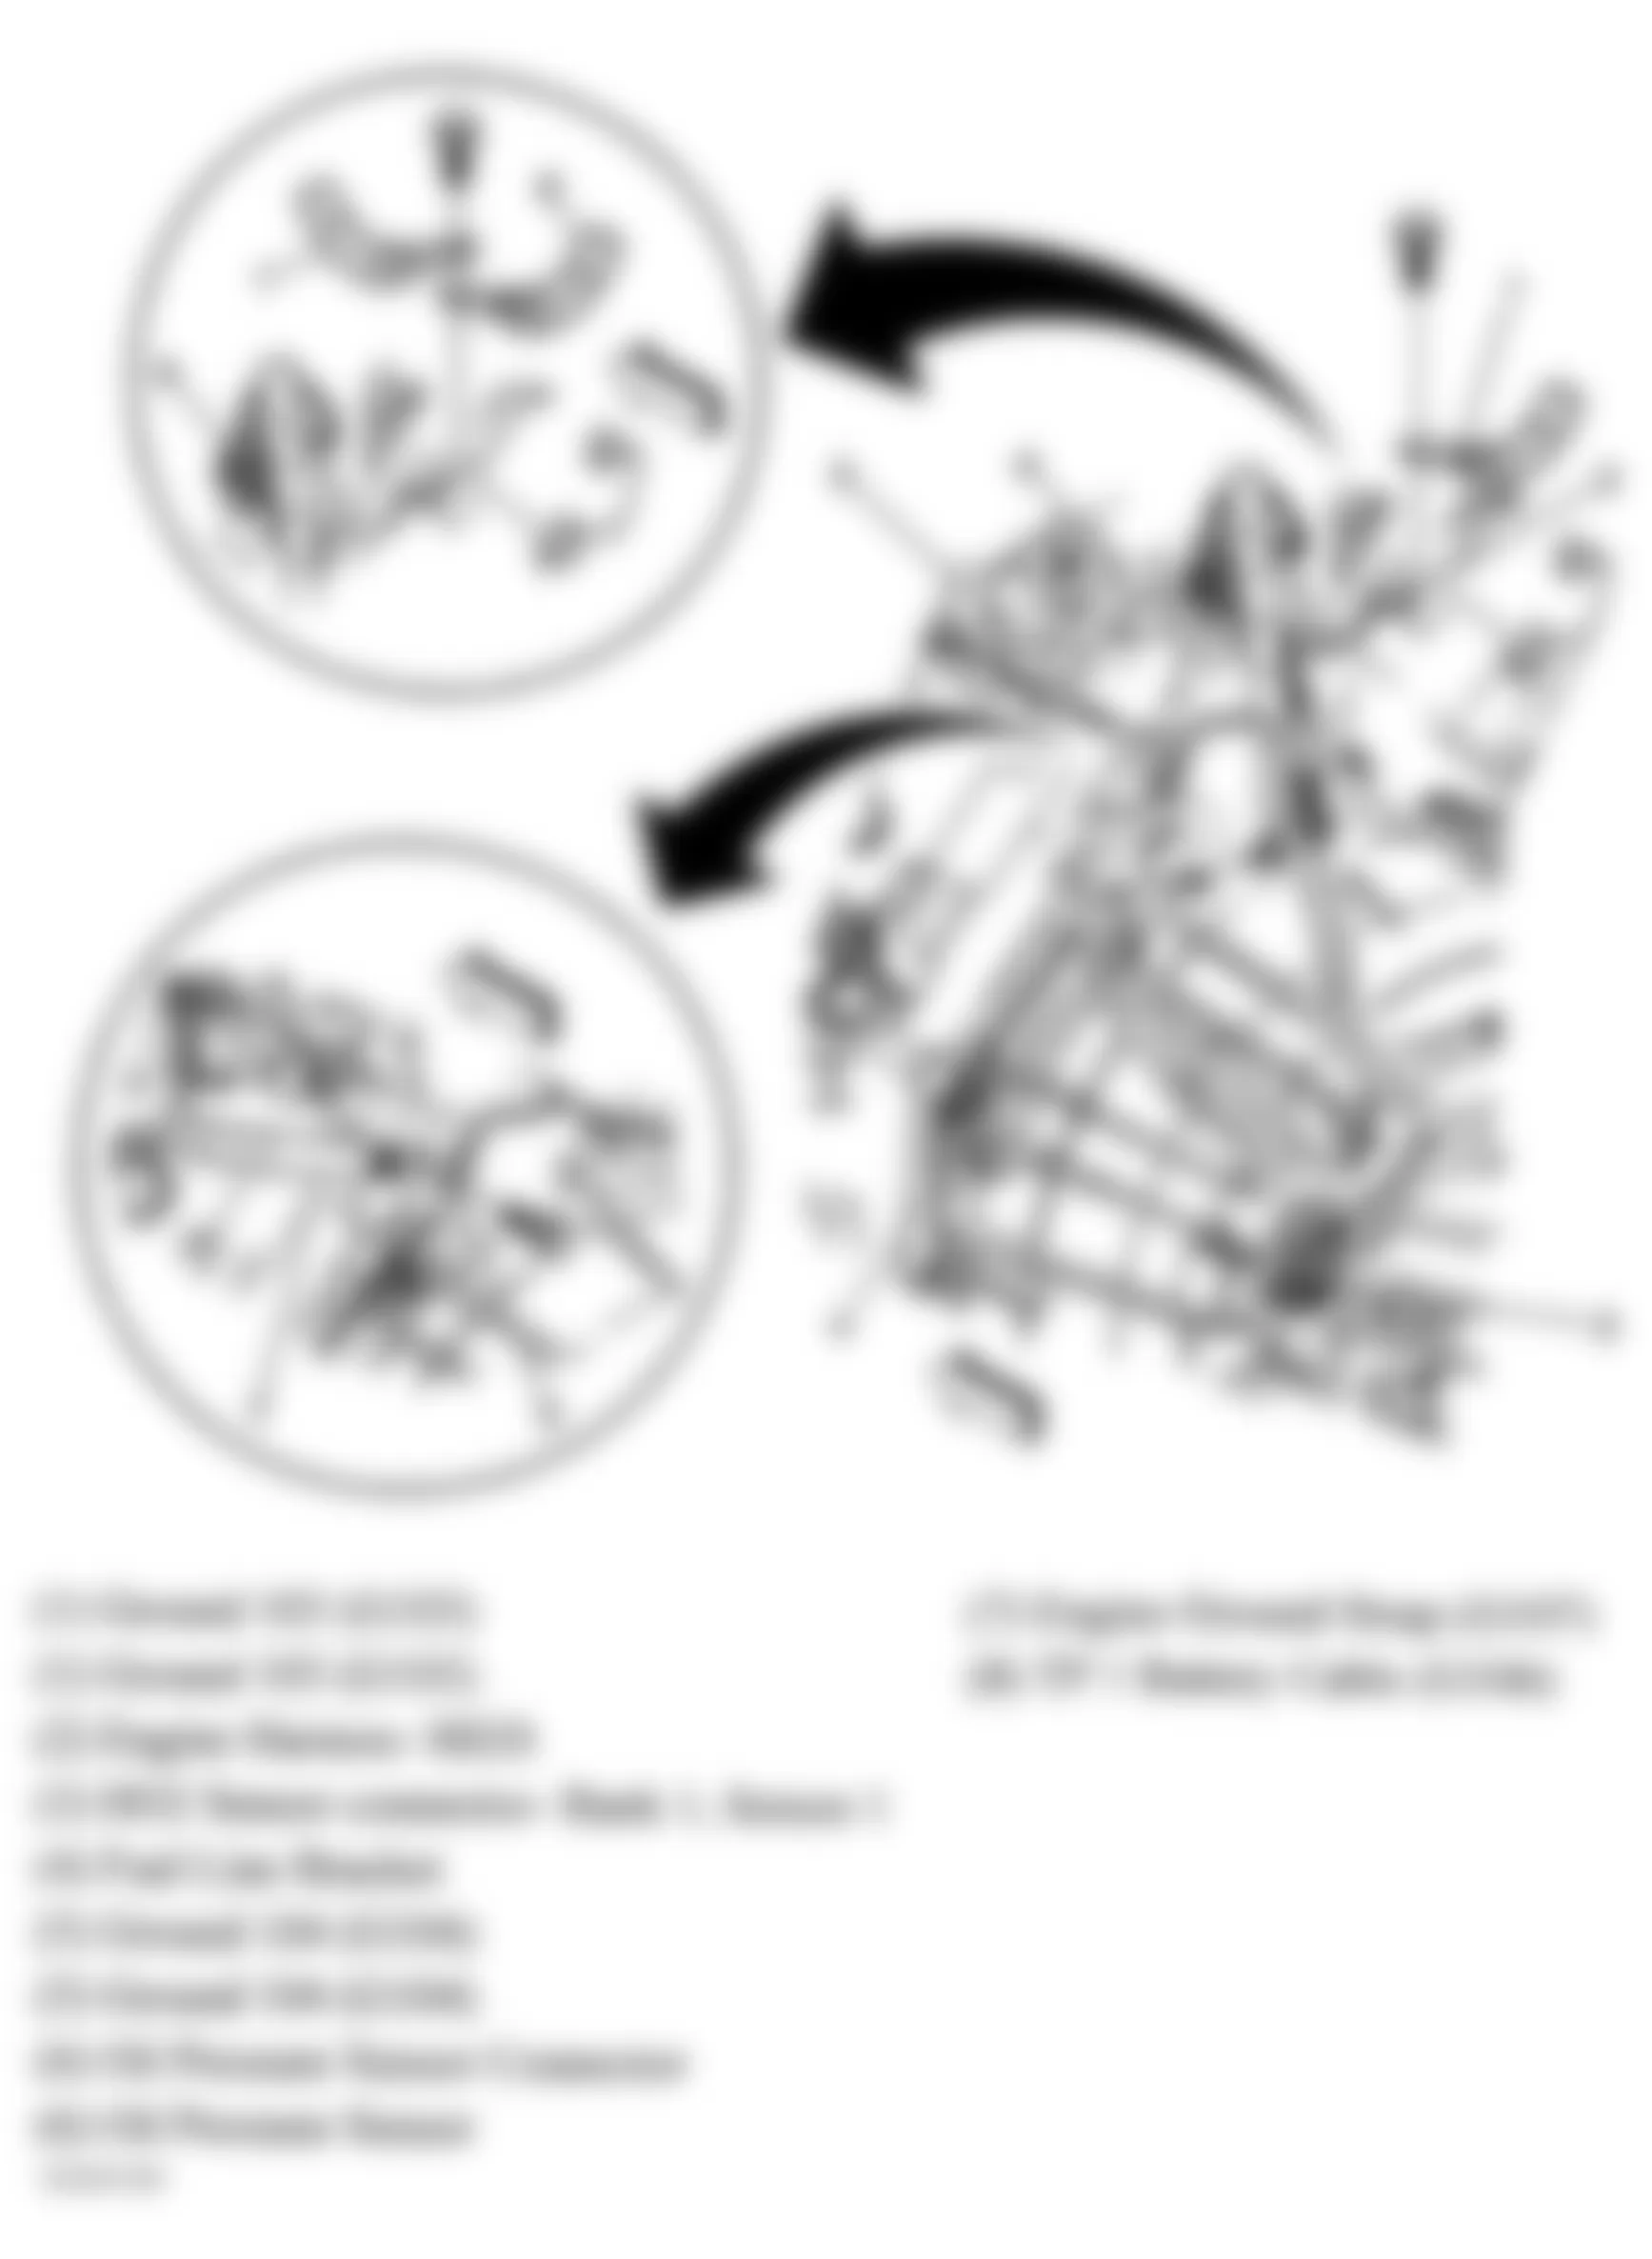 Chevrolet Avalanche 2500 2005 - Component Locations -  Rear Of Engine (4.8L, 5.3L & 6.0L)